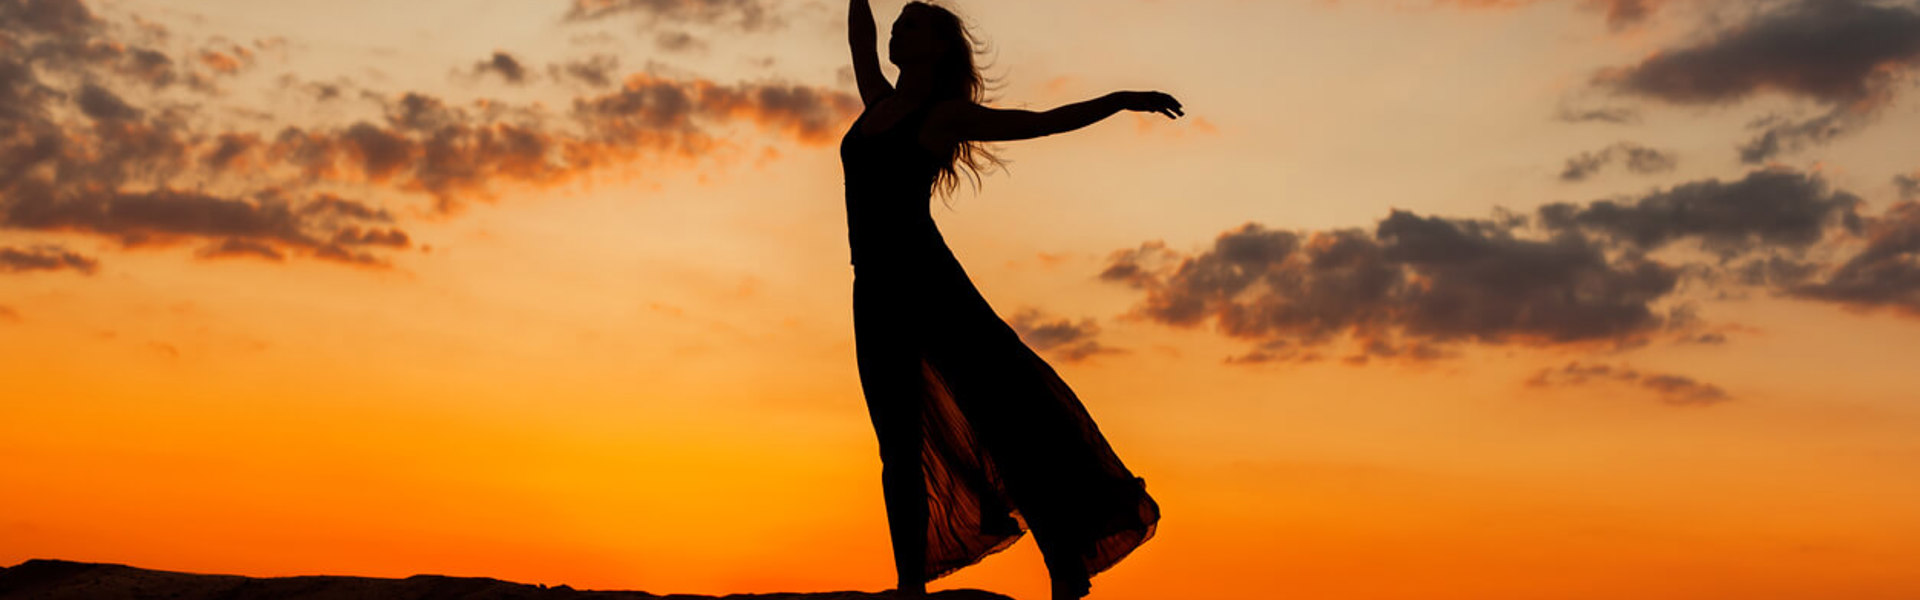 a silhouette of a woman with long hair dancing on a orange horizon in a skirt